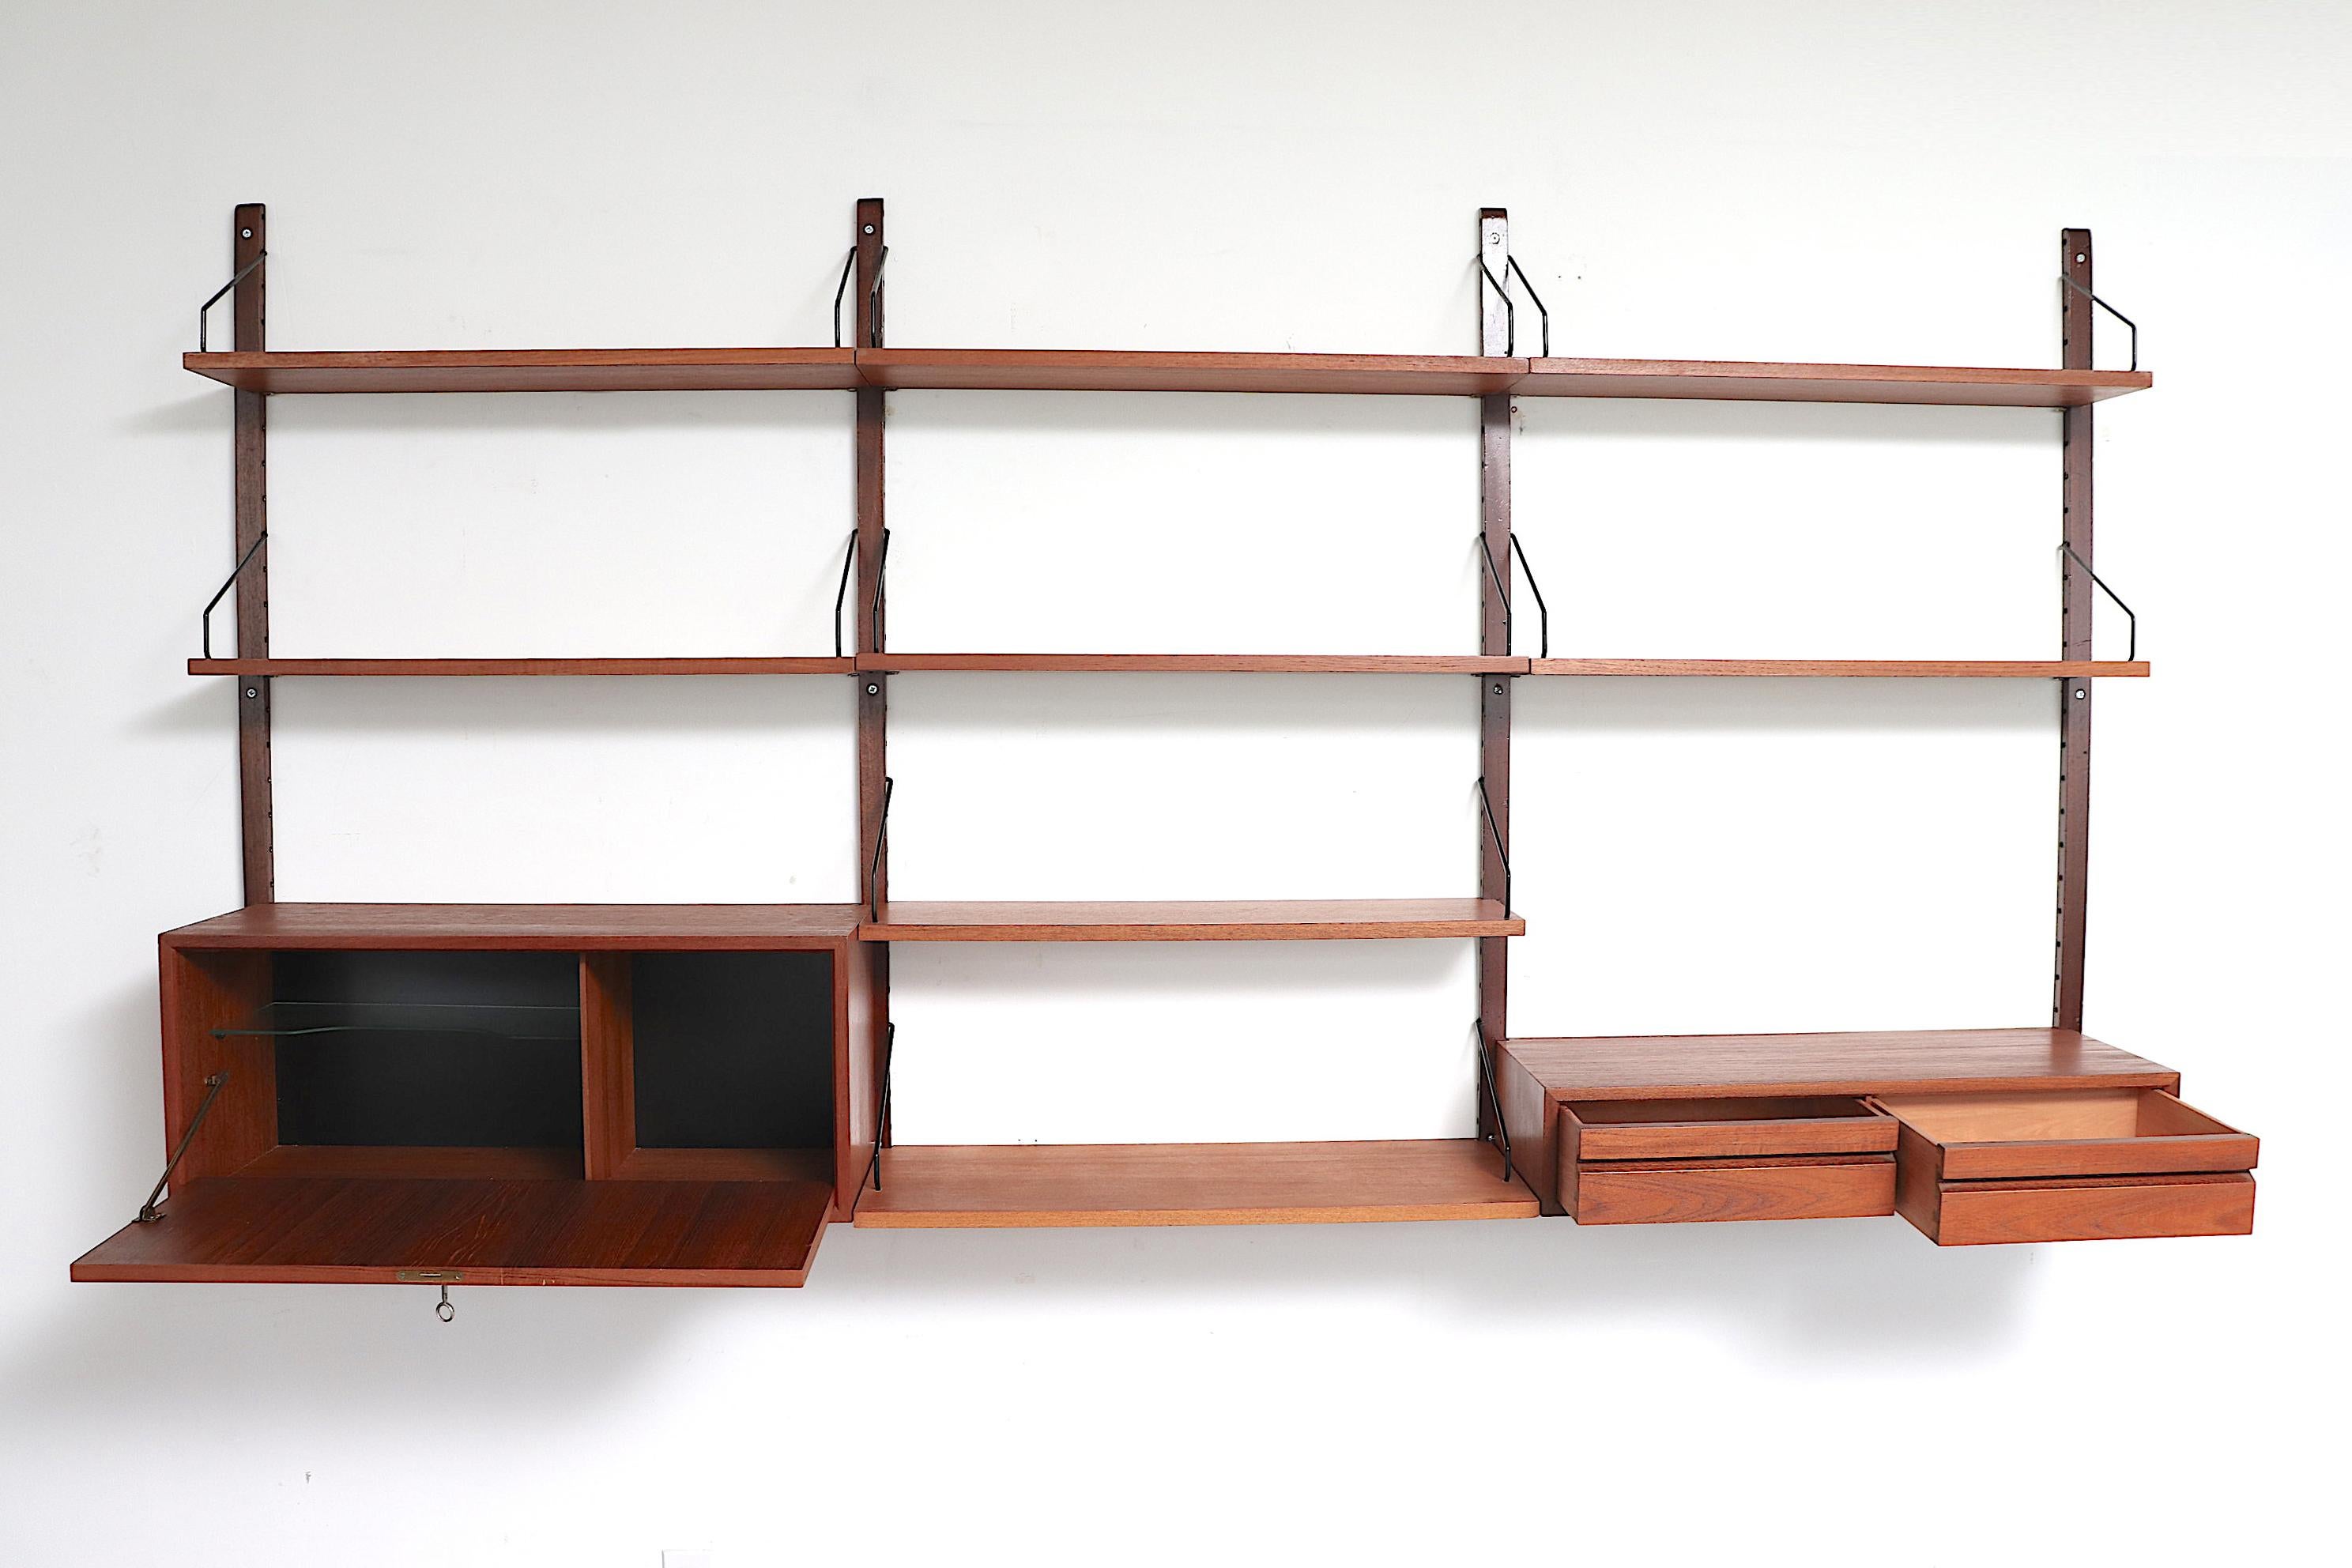 Beautiful three-section Poul Cadovius wall unit with drop-down cabinet including a key, multiple shelves and double drawer storage. Simplistic, versatile and practical with gorgeous teak tone. In original condition with minimal wear and scratches